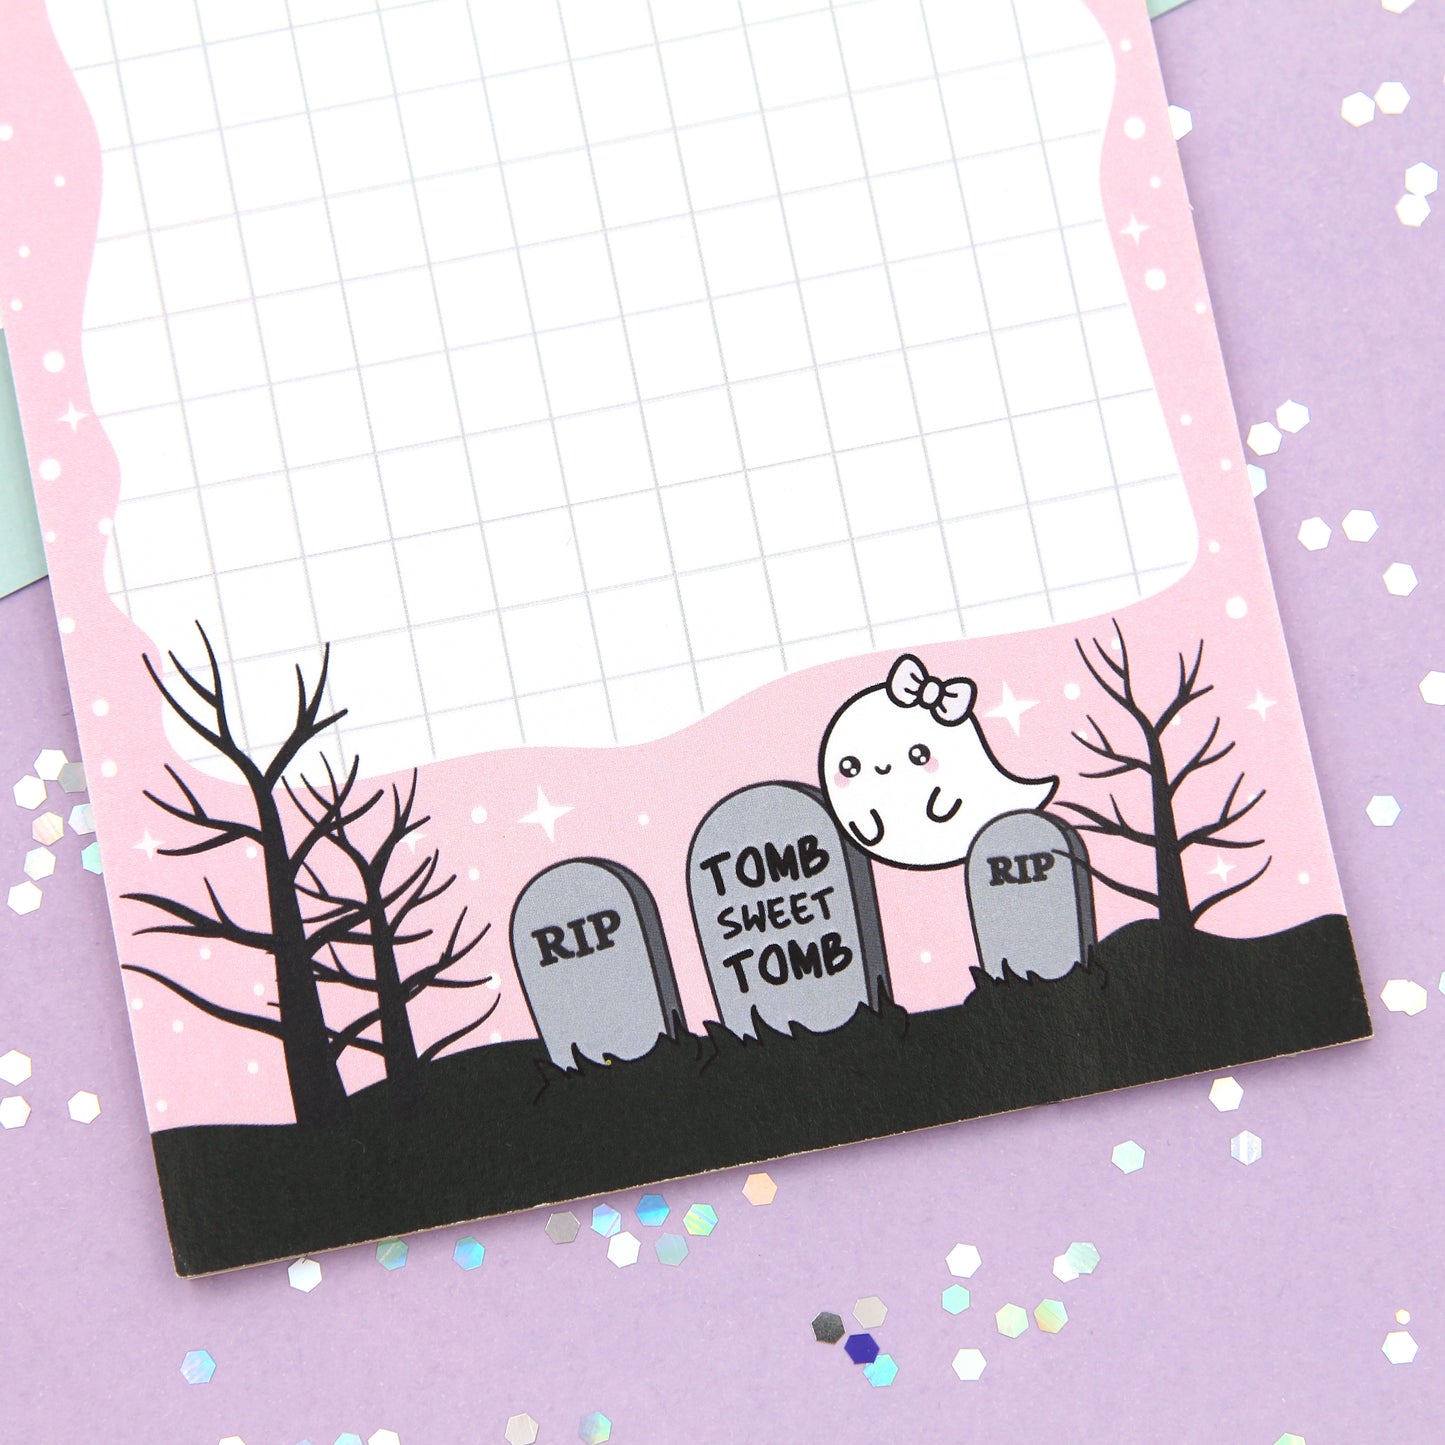 Tomb Sweet Tomb 4" x 6" Memo Notepad - 25 Sheets - Boo and Lunar